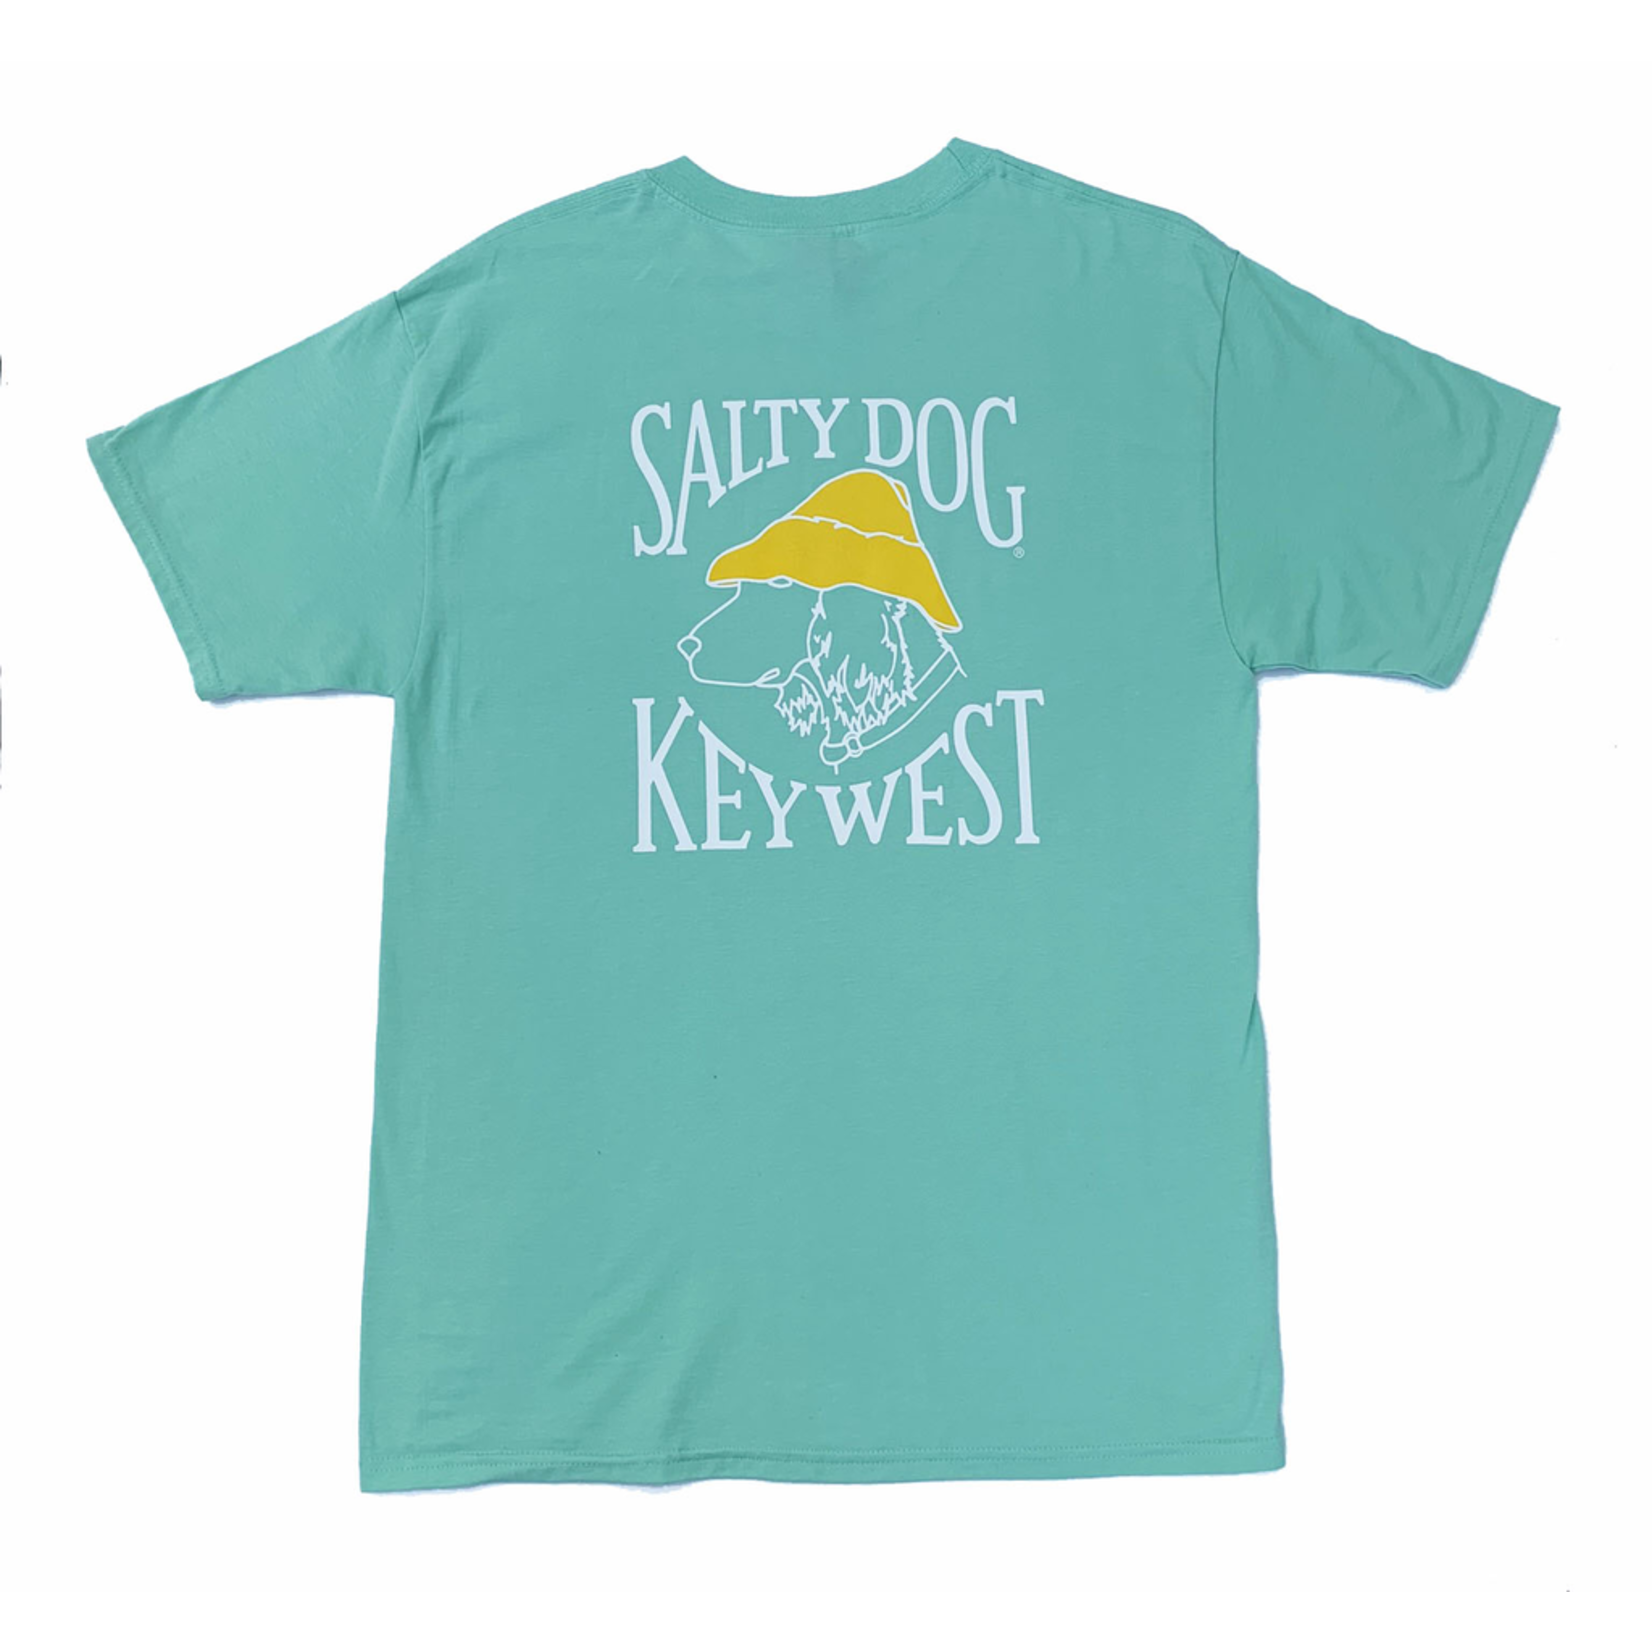 Key West Hanes Beefy S/S Clean Mint